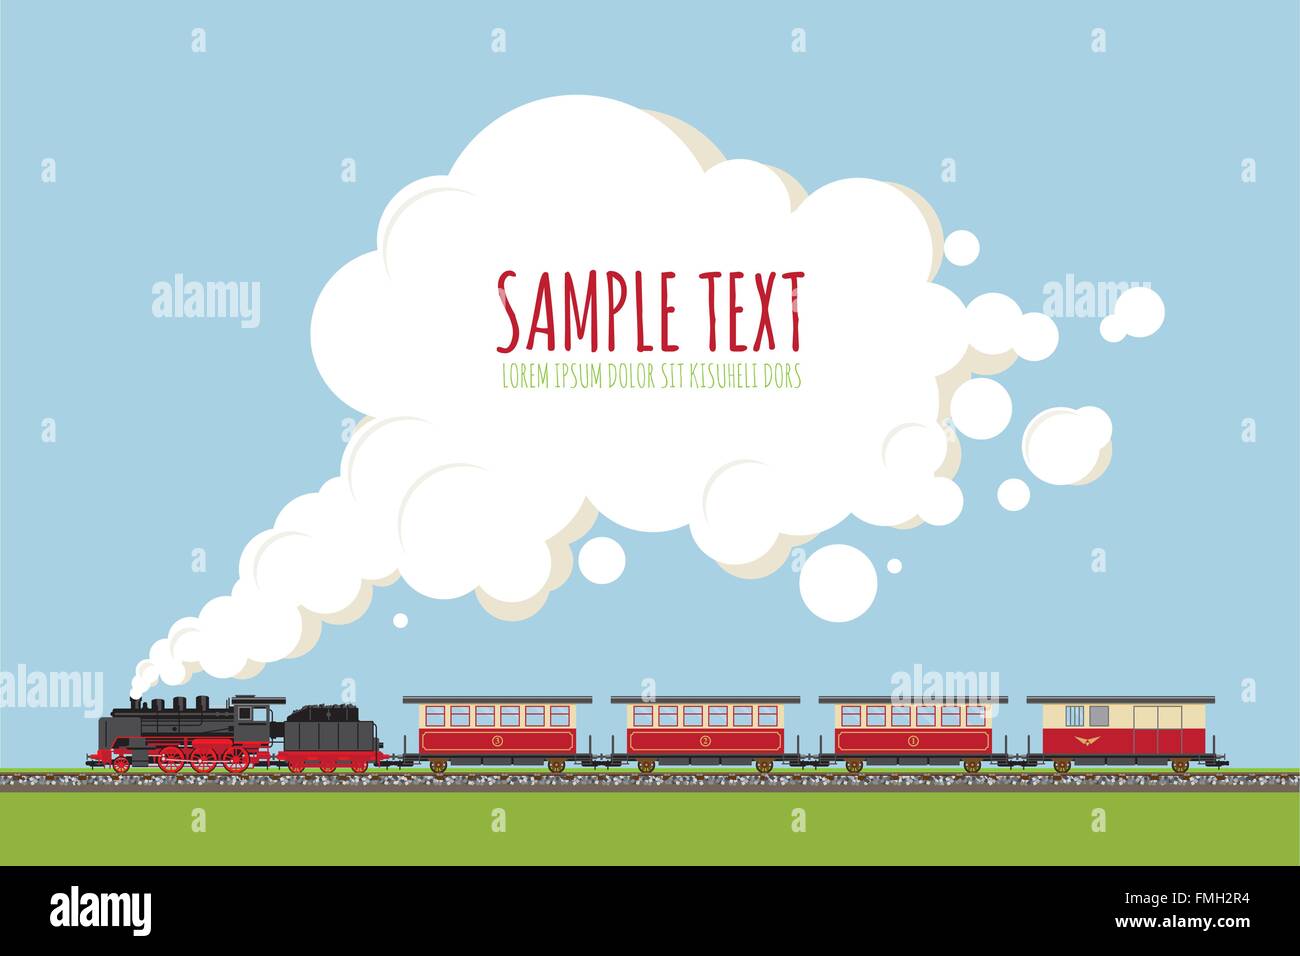 Historic locomotive and wagons on railroad track, copy space in cloud of steam, flat design, no gradients or transparencies. Stock Vector